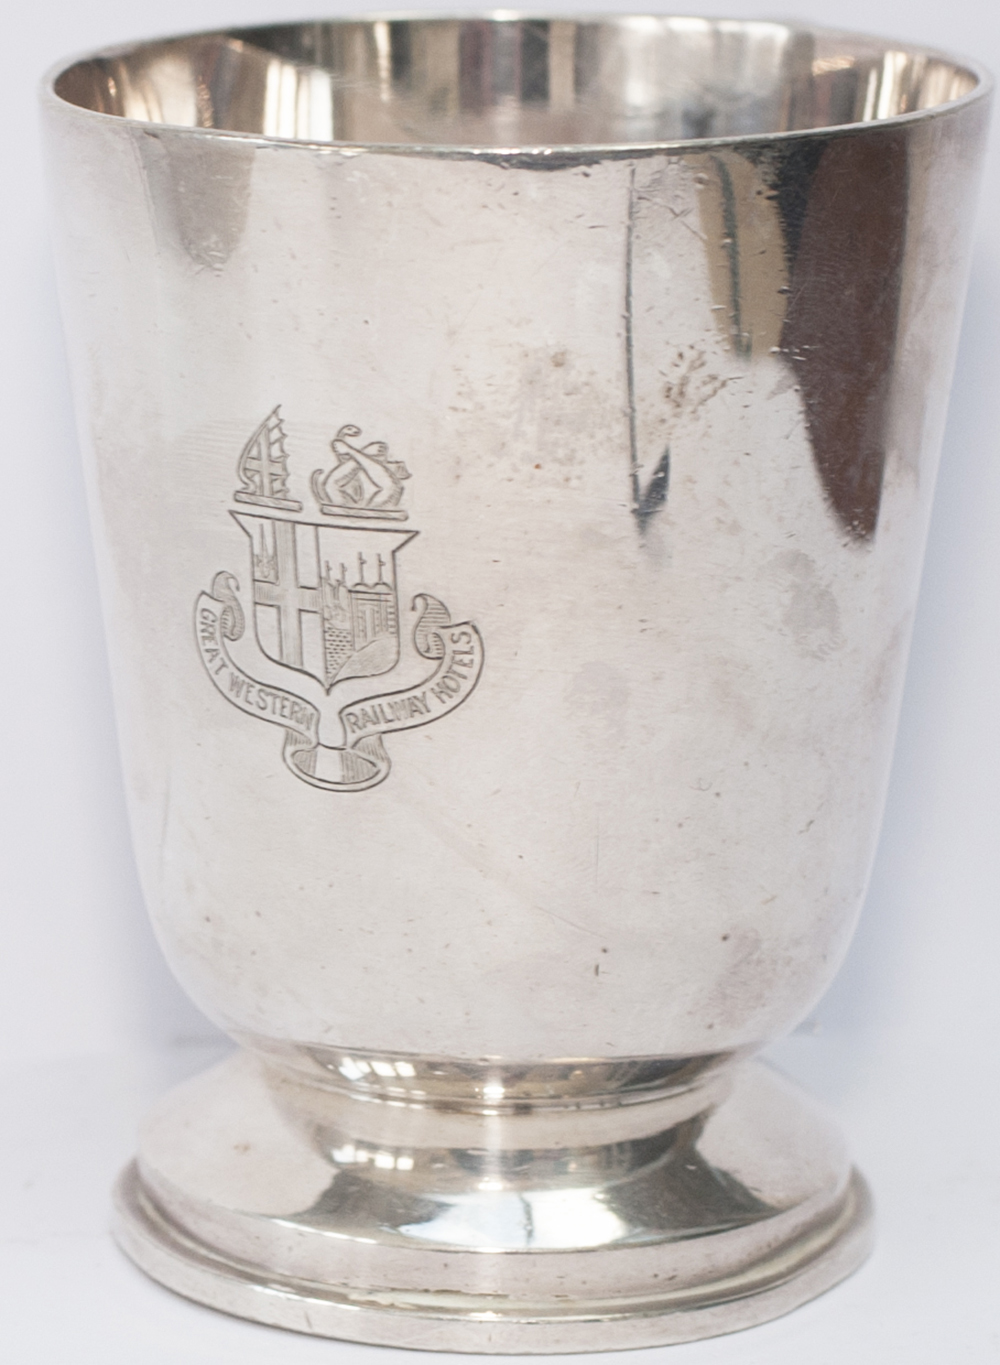 GWR silverplate half pint tankard with large GWR CoA and Great Western Railways in scroll to the